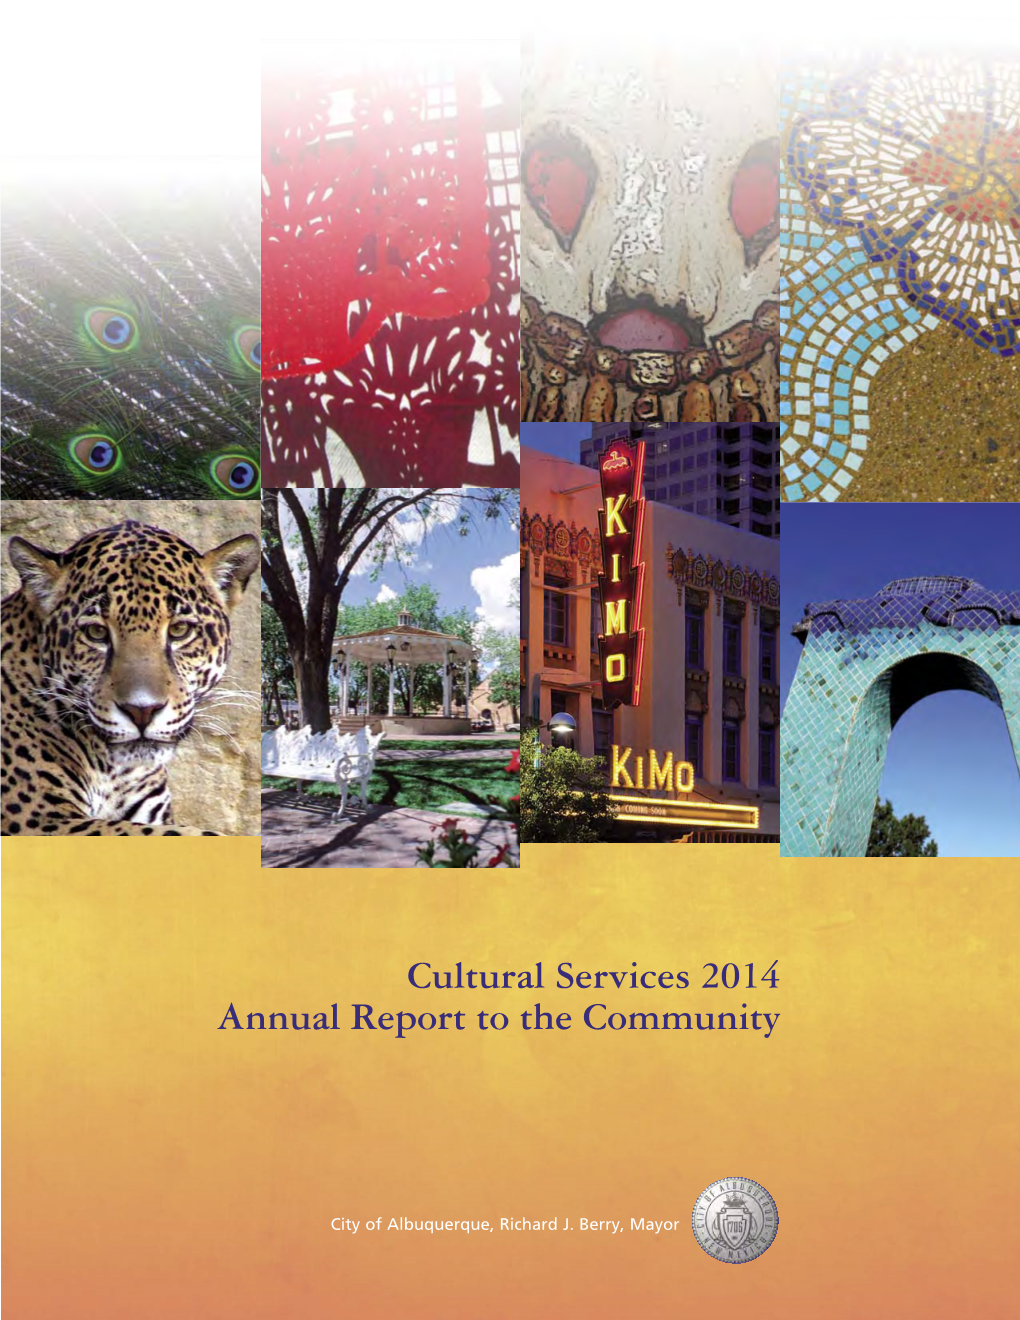 Cultural Services 2014 Annual Report to the Community